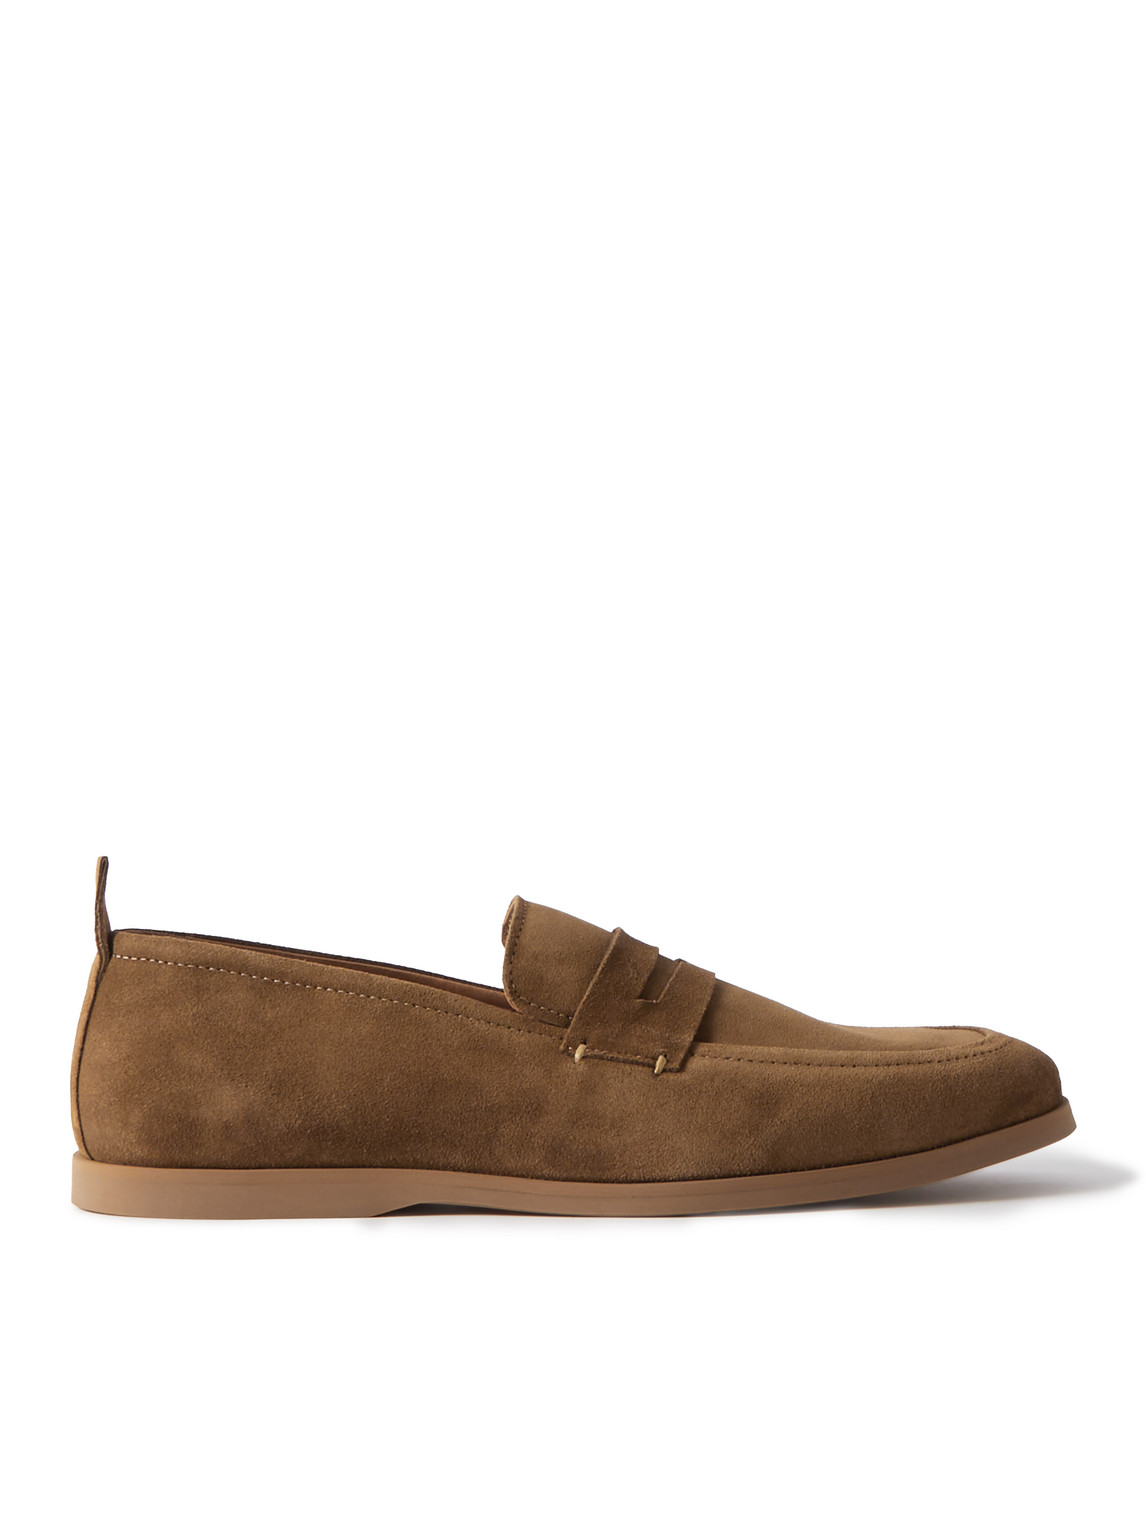 Mr P Regenerated Suede By Evolo® Penny Loafers In Brown